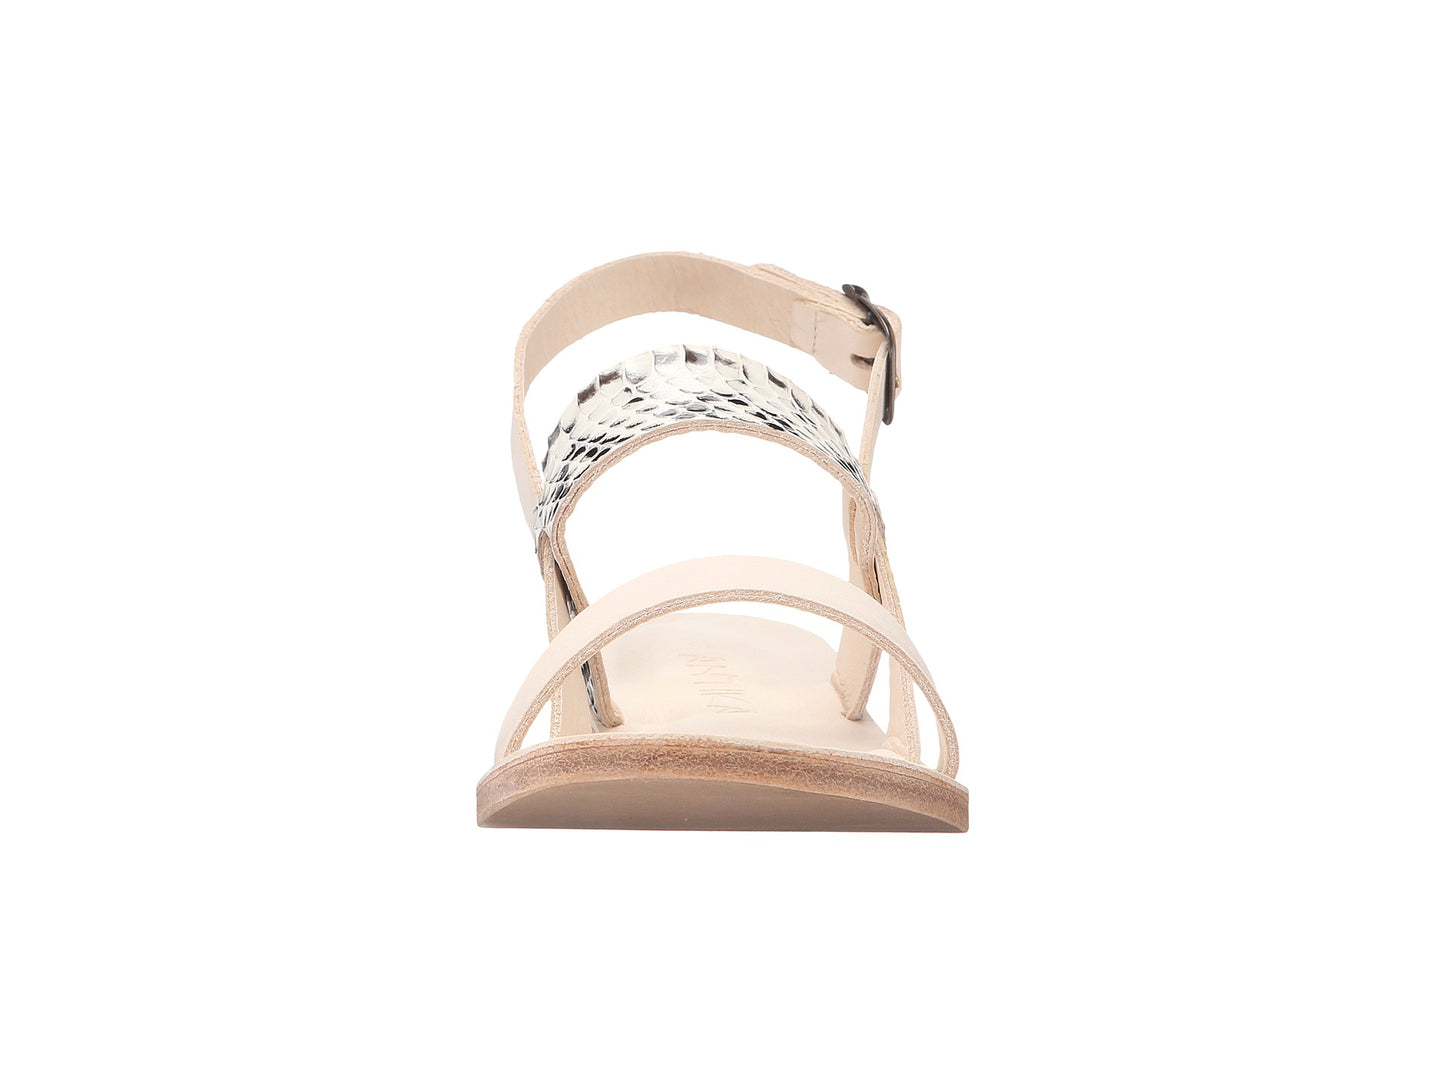 Abbot Kinney Blvd Natural snake skin, handmade leather buckle sandals with front loop - Front View